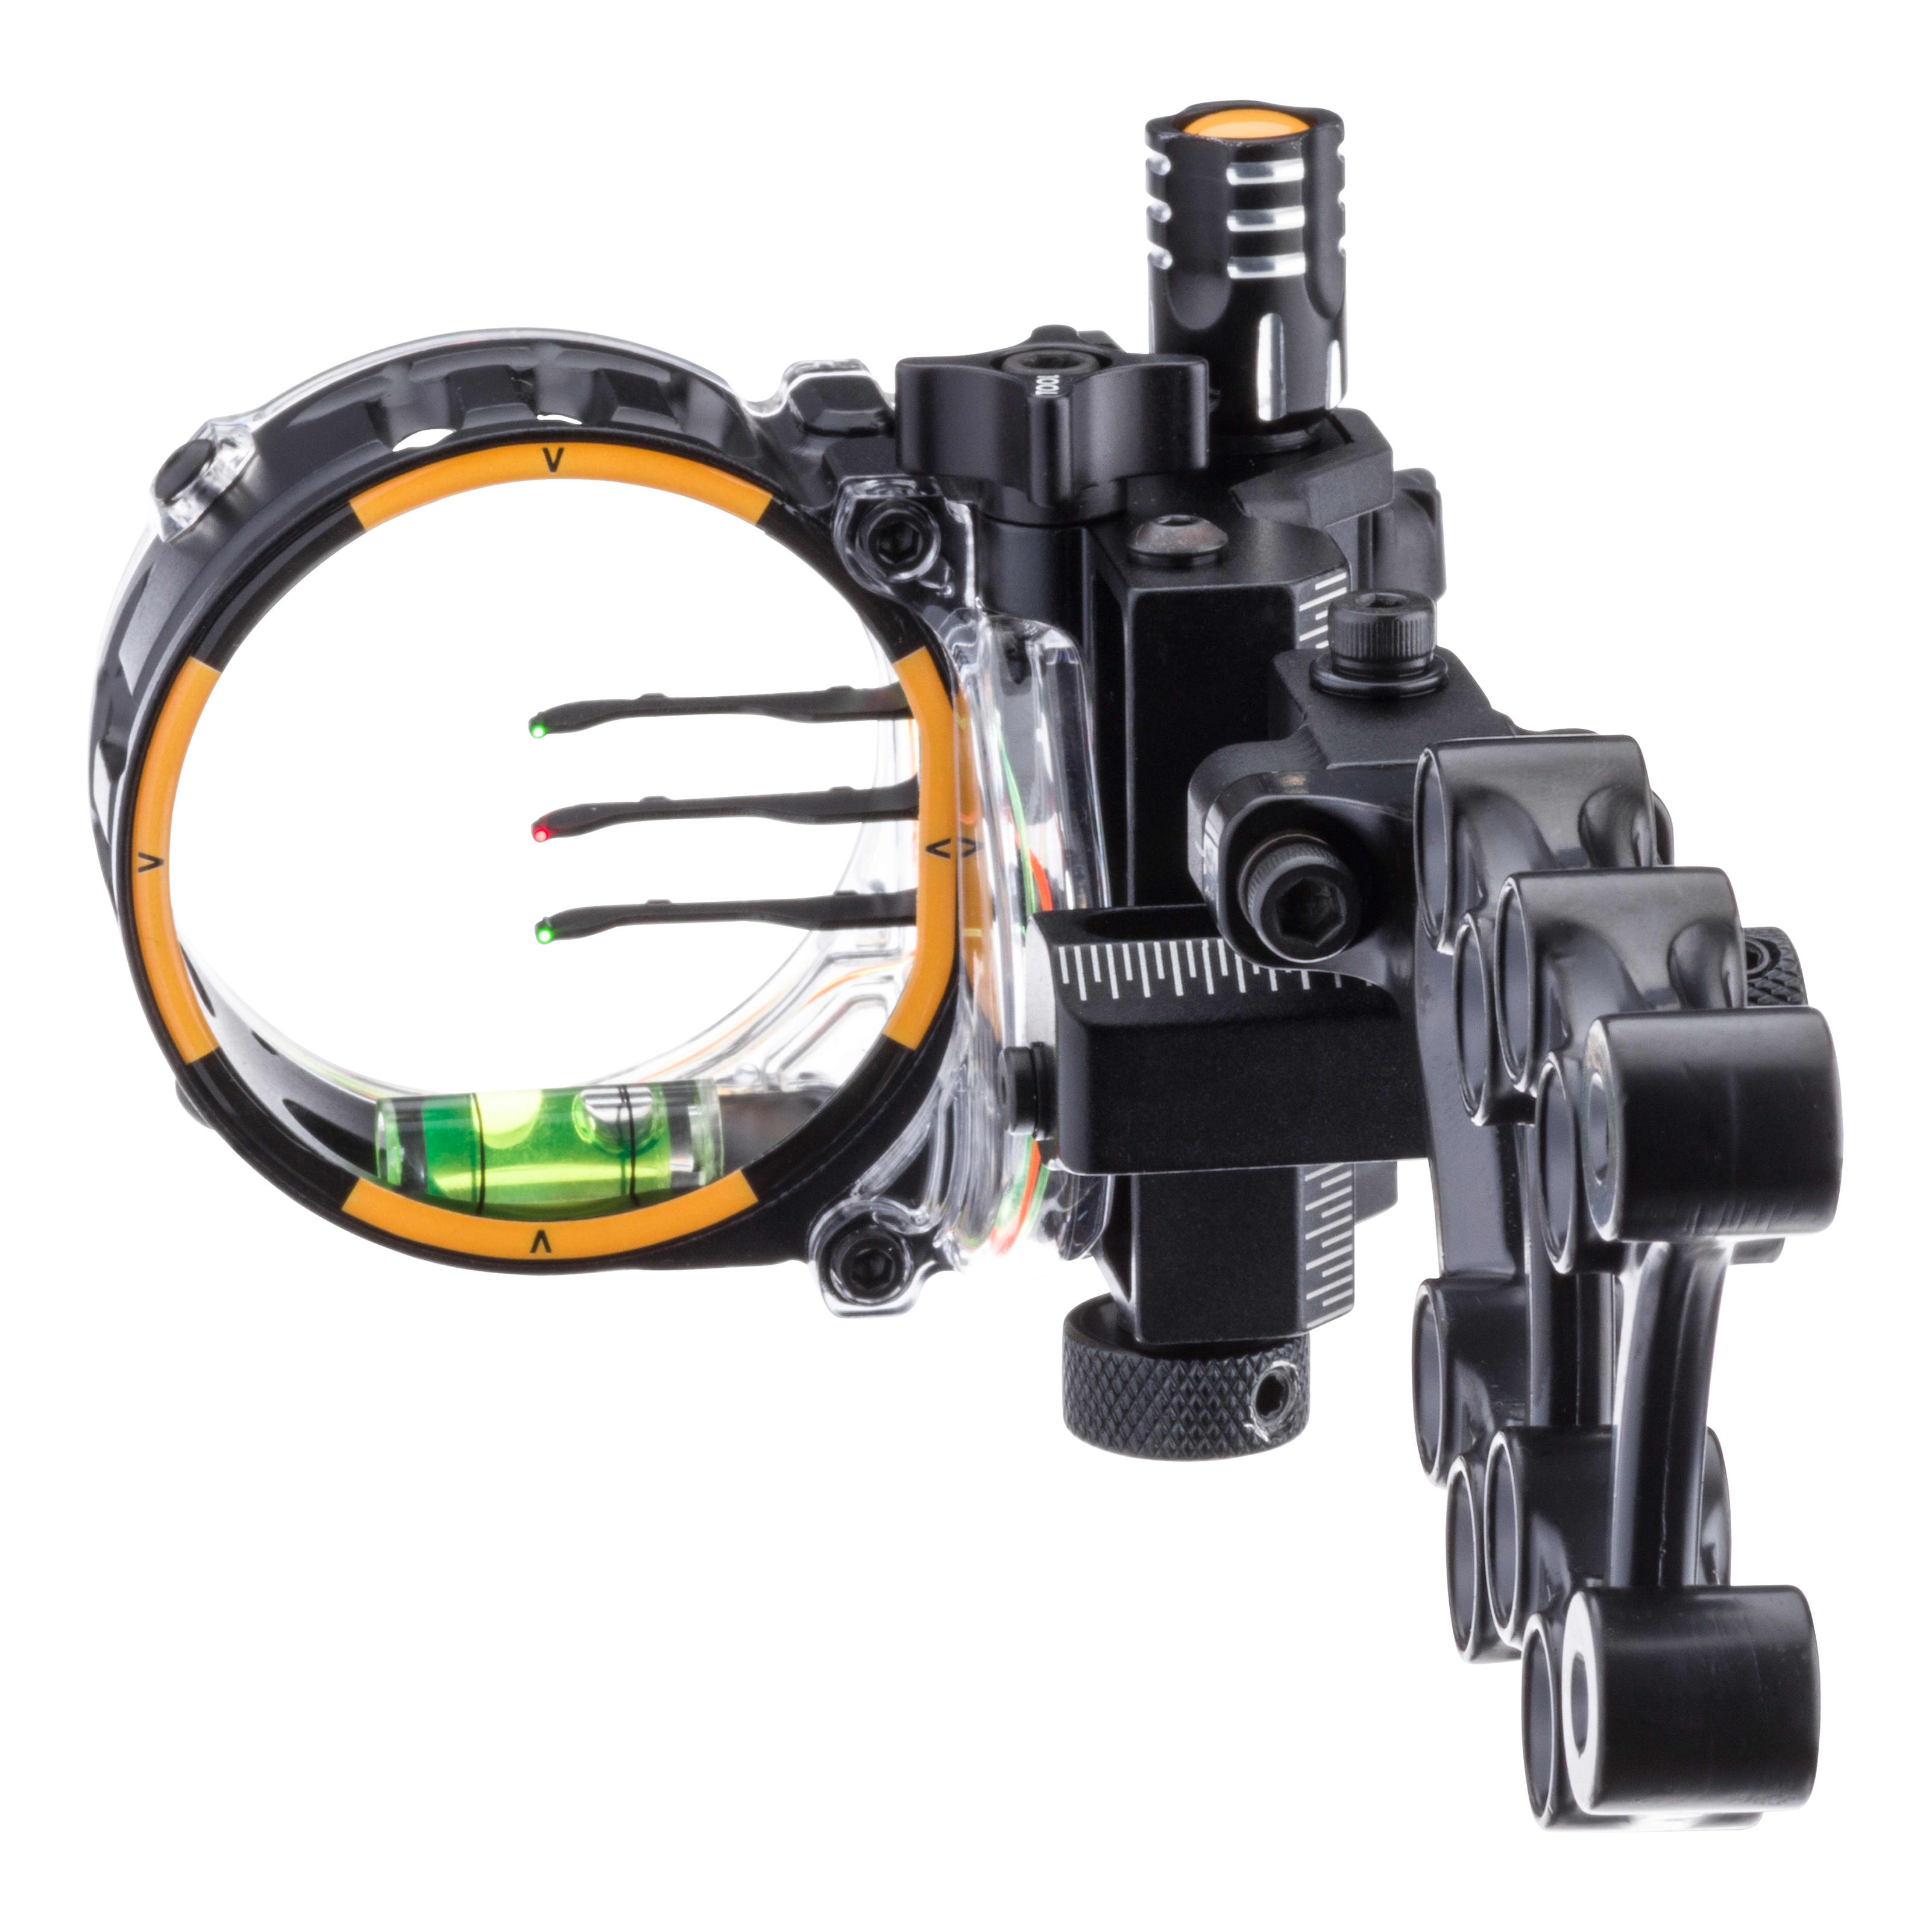 Trophy Ridge® Hotwire 3-Pin Bow Sight - Close Up View